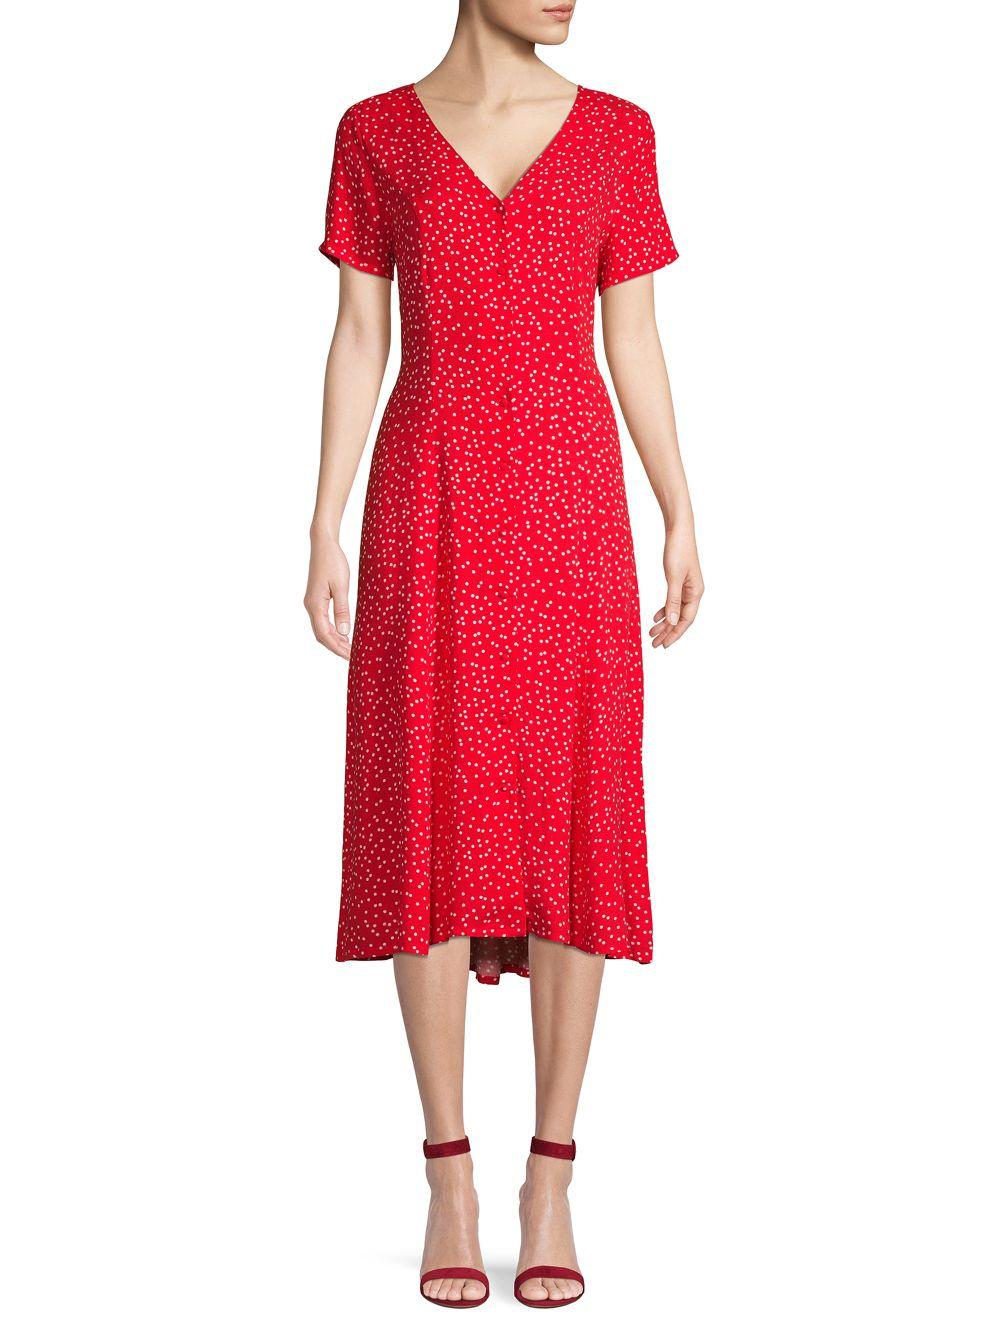 Saks Fifth Avenue Synthetic Ditsy Print Midi Dress in Red - Lyst